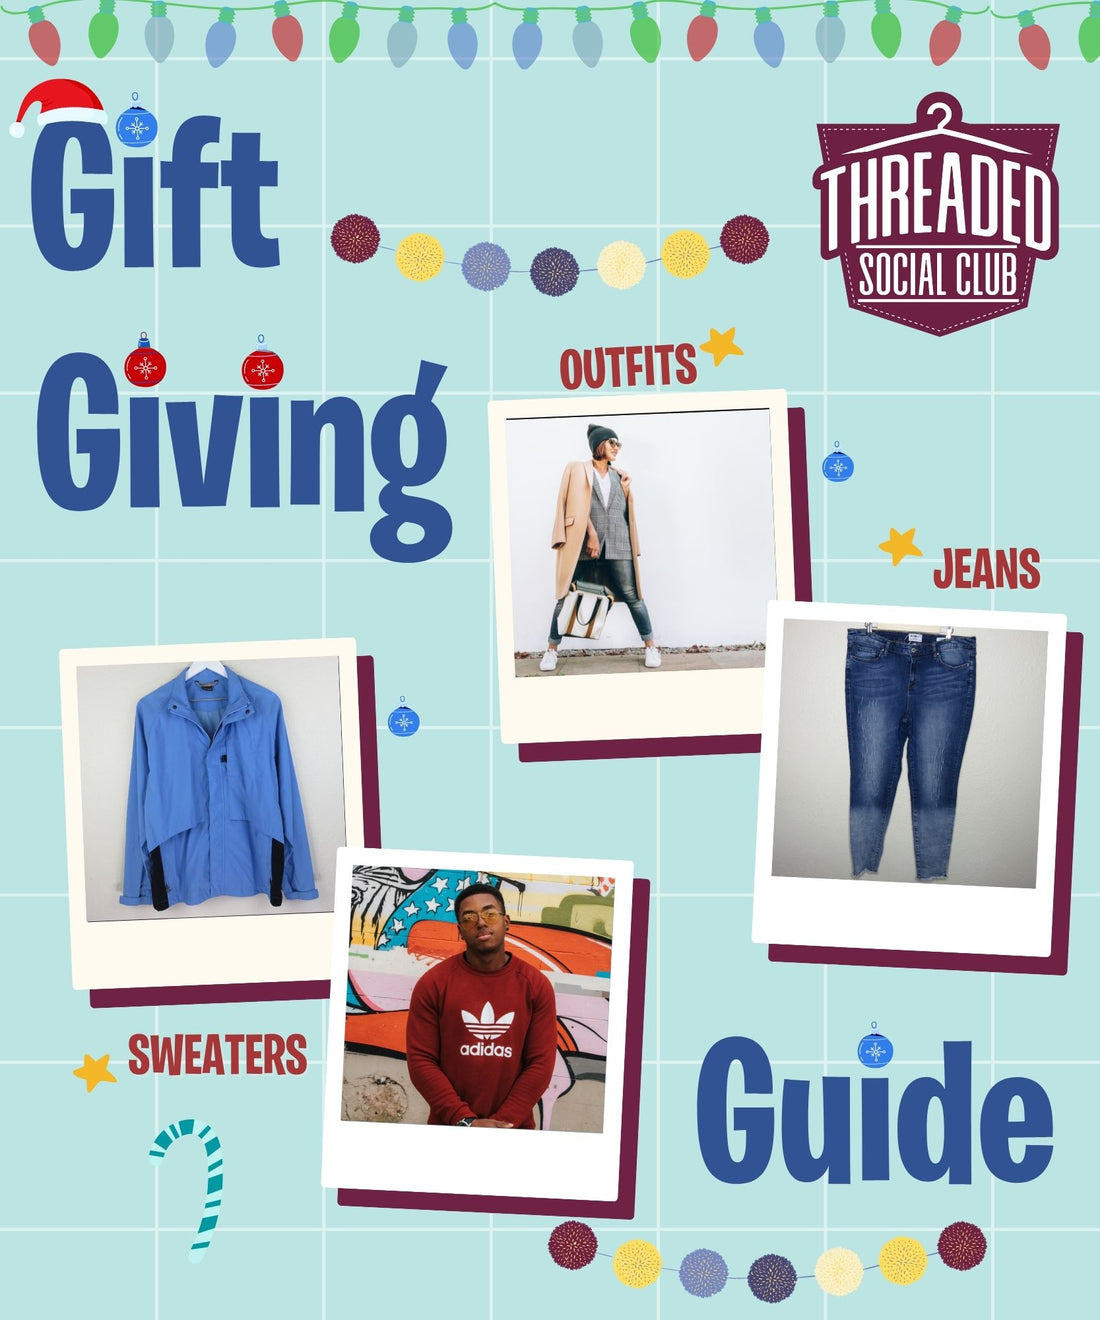 Threaded Social Club's: Gift Giving Guide